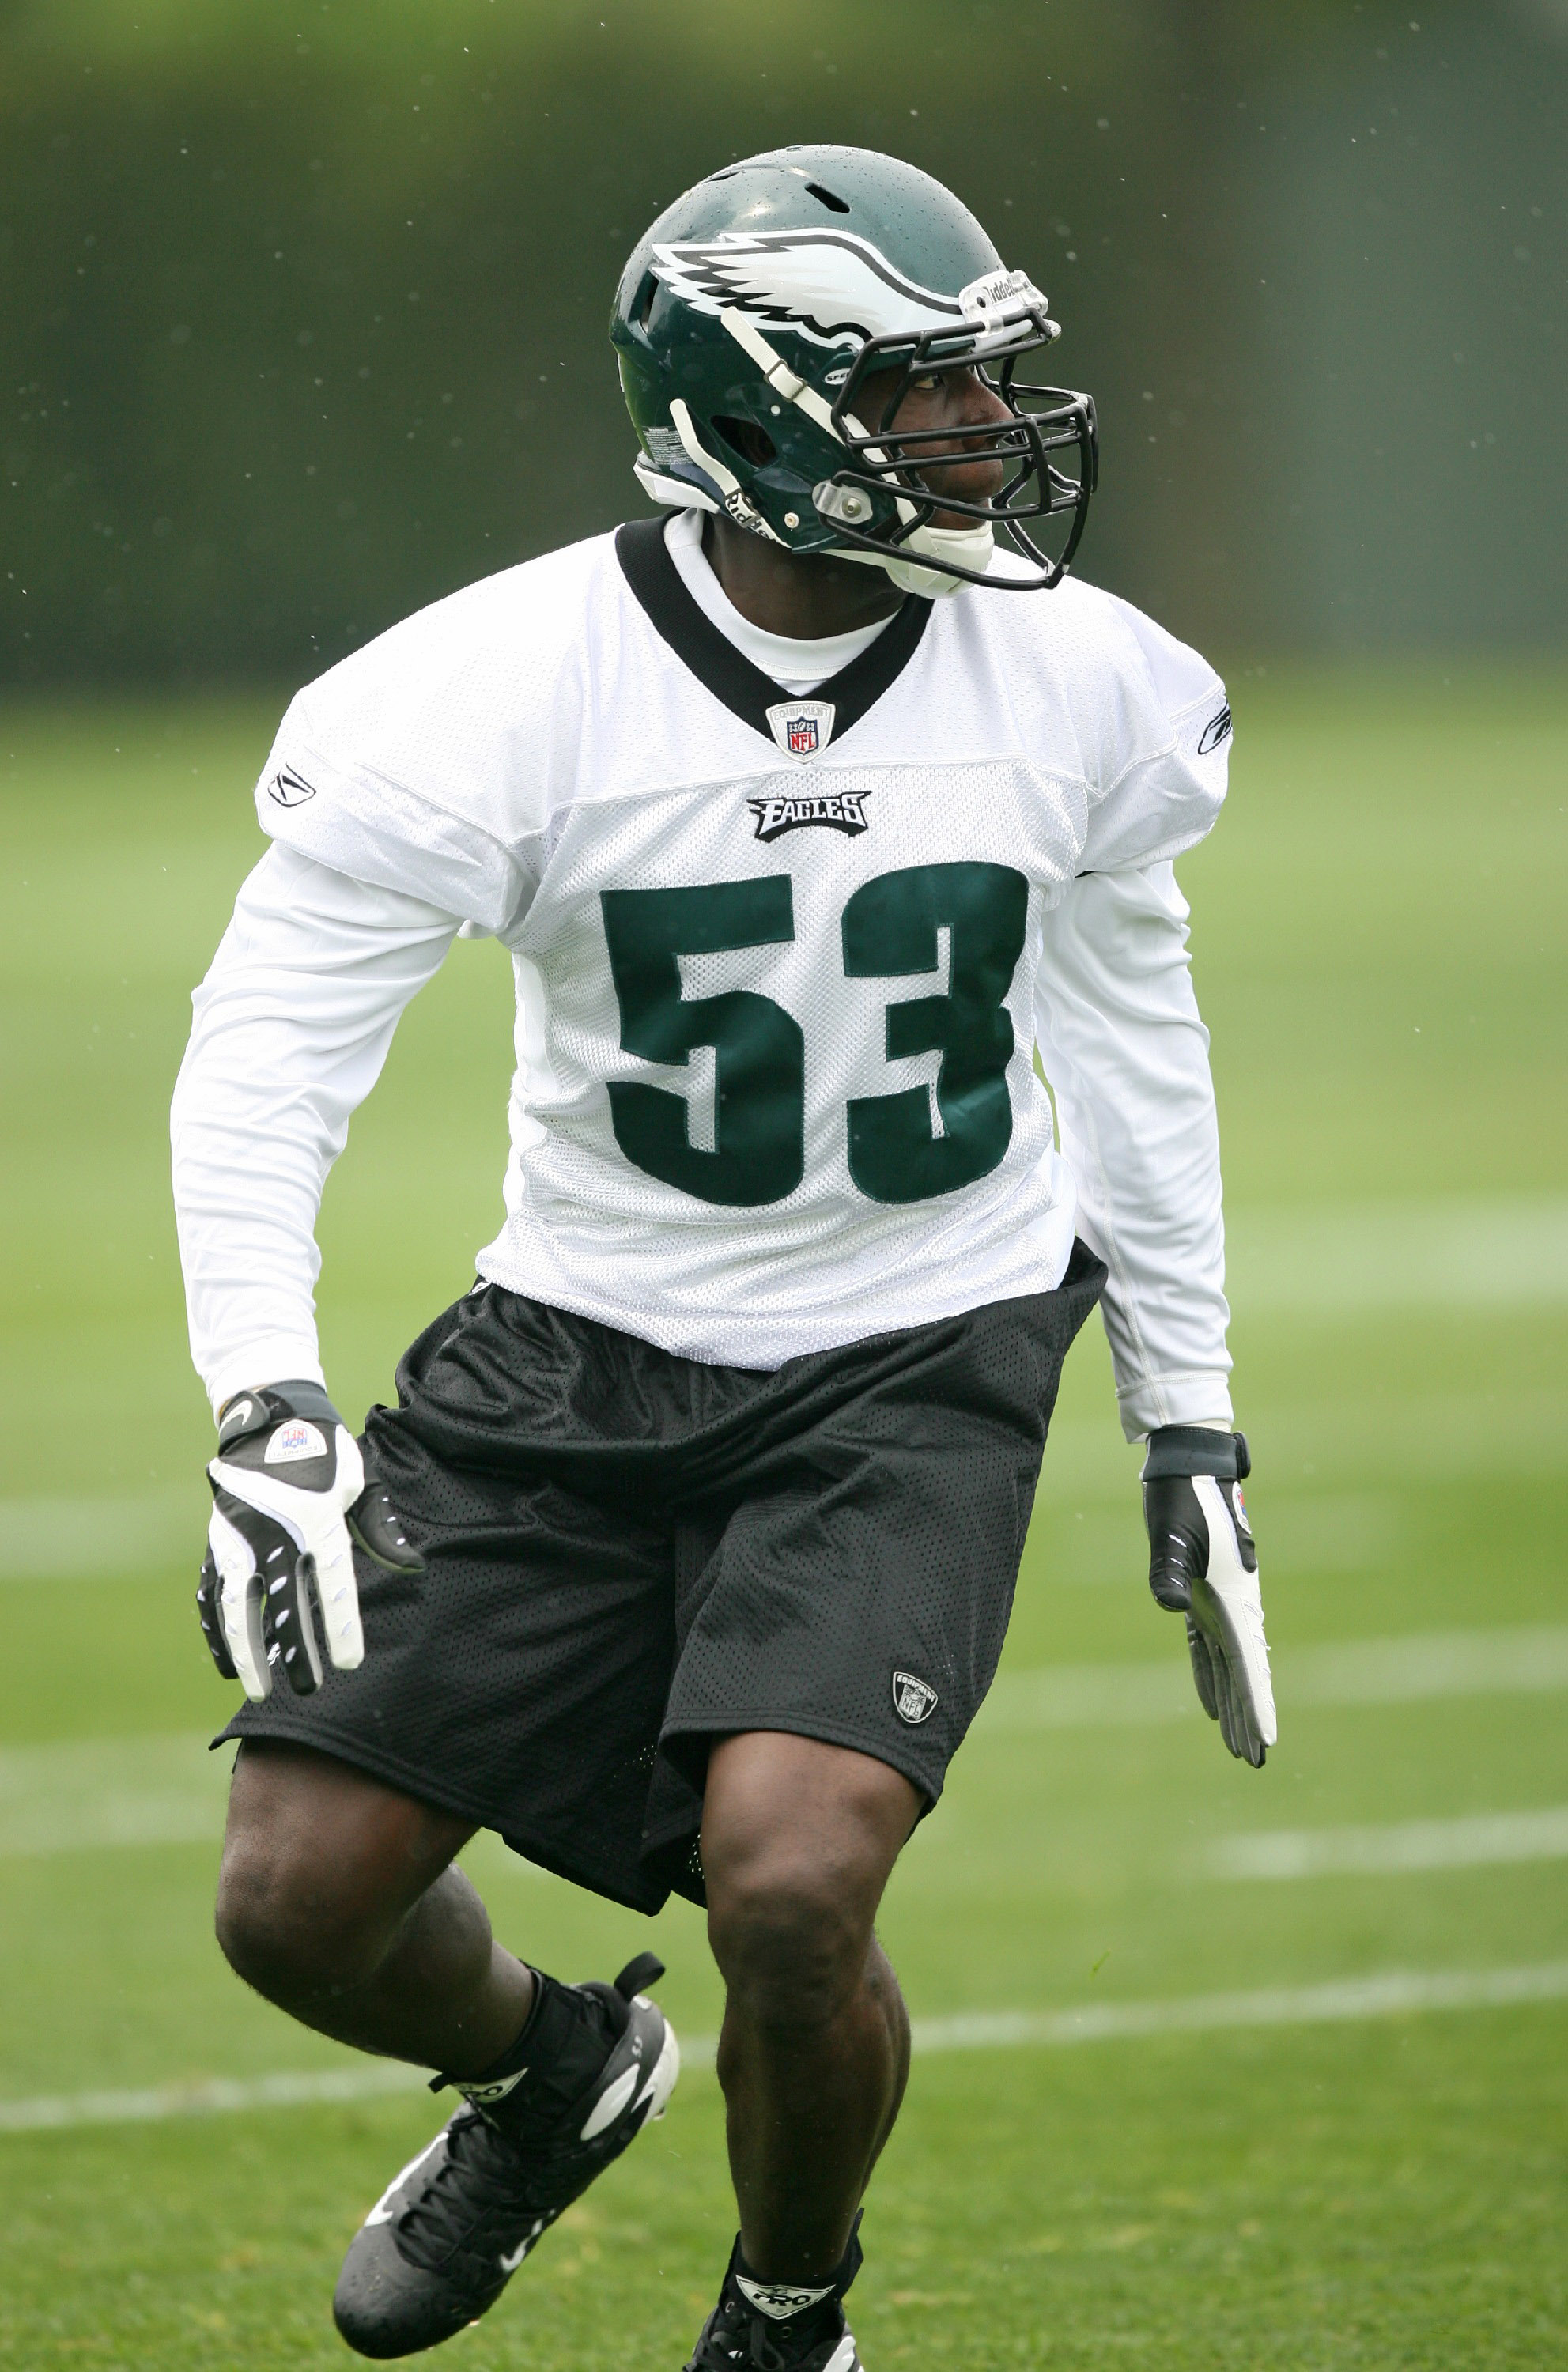 PHILADELPHIA - MAY 1: Linebacker Moise Fokou #53 of the Philadelphia Eagles practices during minicamp at the NovaCare Complex on May 1, 2009 in Philadelphia, Pennsylvania. (Photo by Hunter Martin/Getty Images)